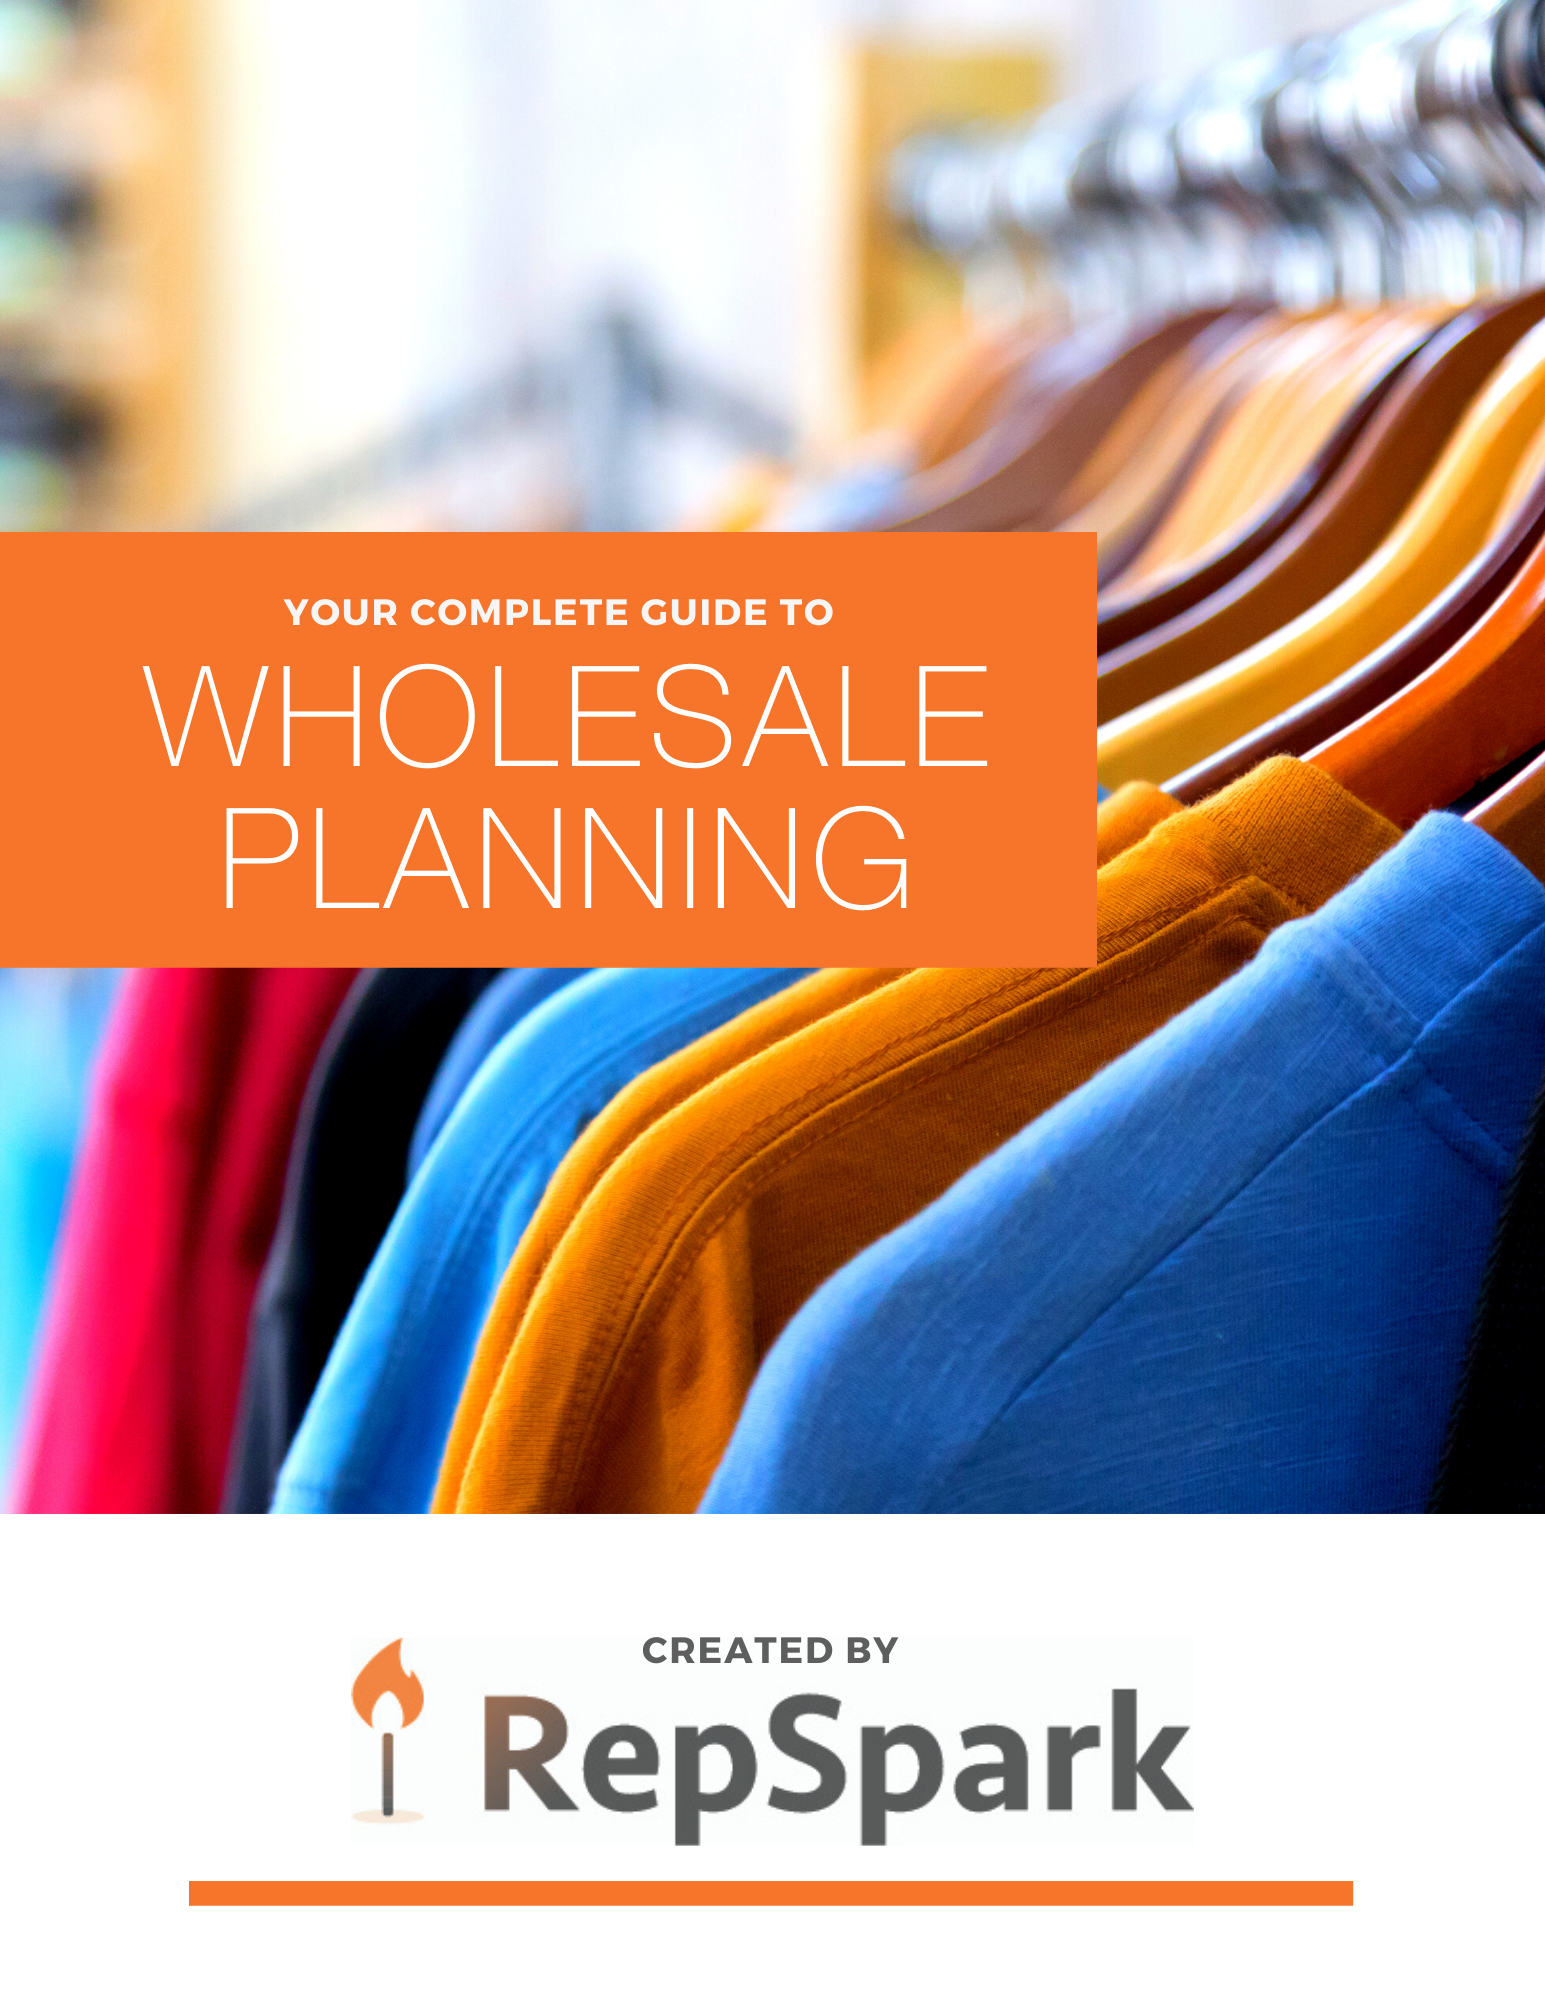 _RepSpark’s Complete Guide to Wholesale Planning 